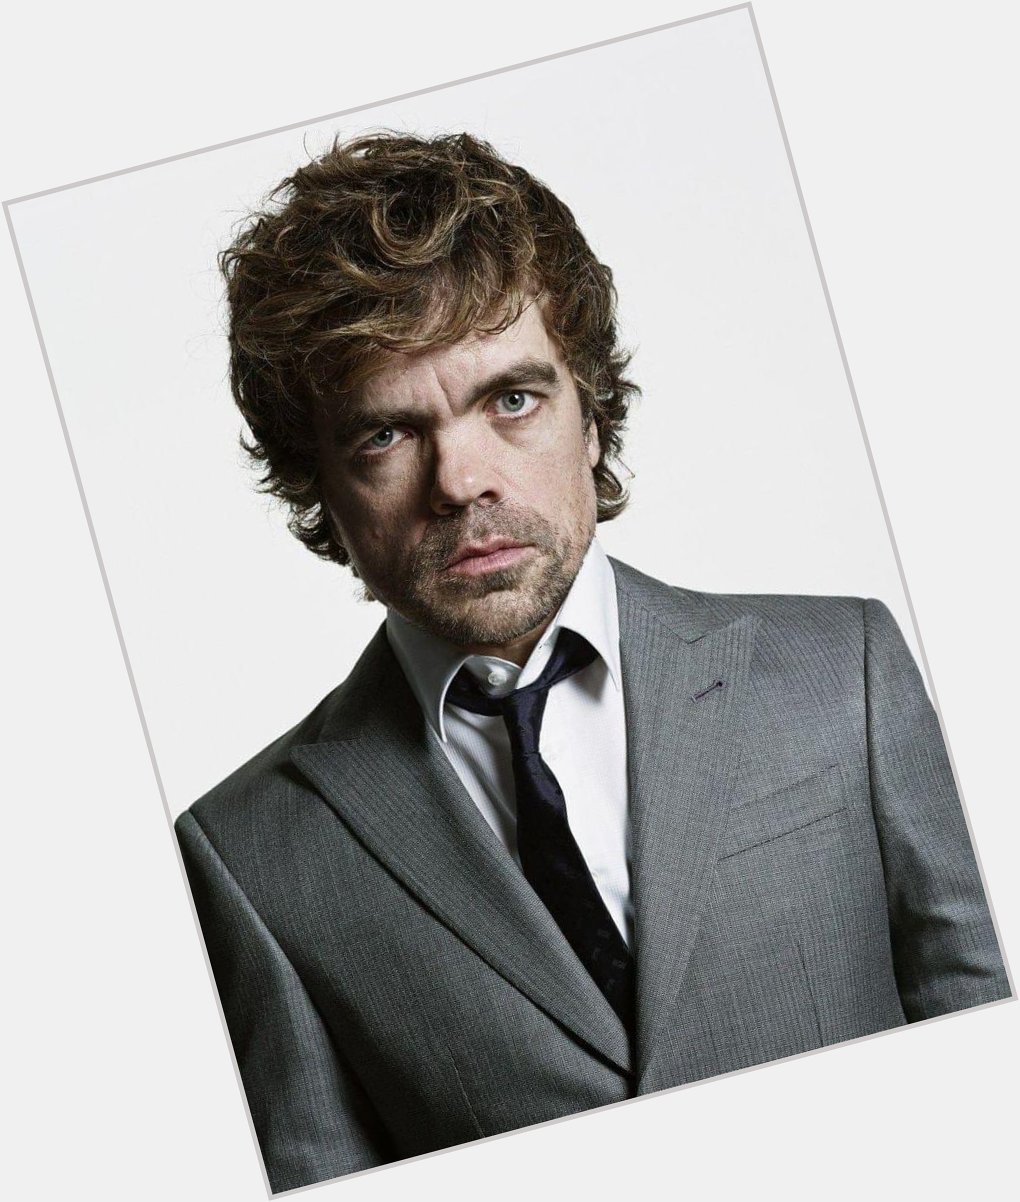 Happy Birthday to Peter Dinklage who turns 54 today!  